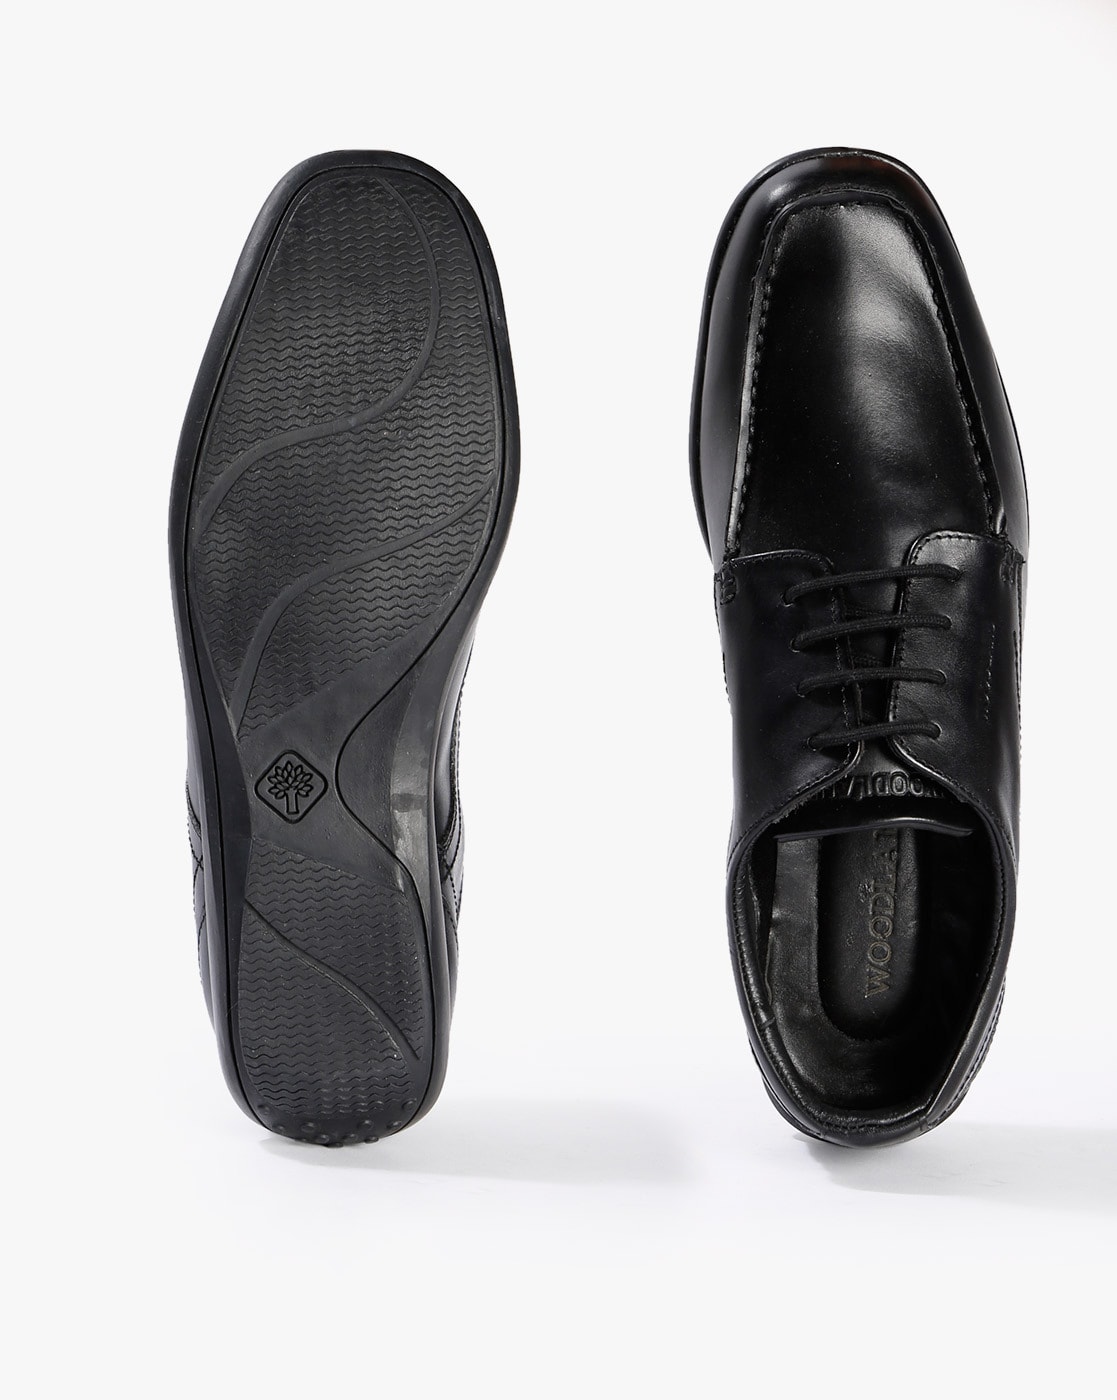 Shop the latest casual lace-up shoes for Men at Woodland